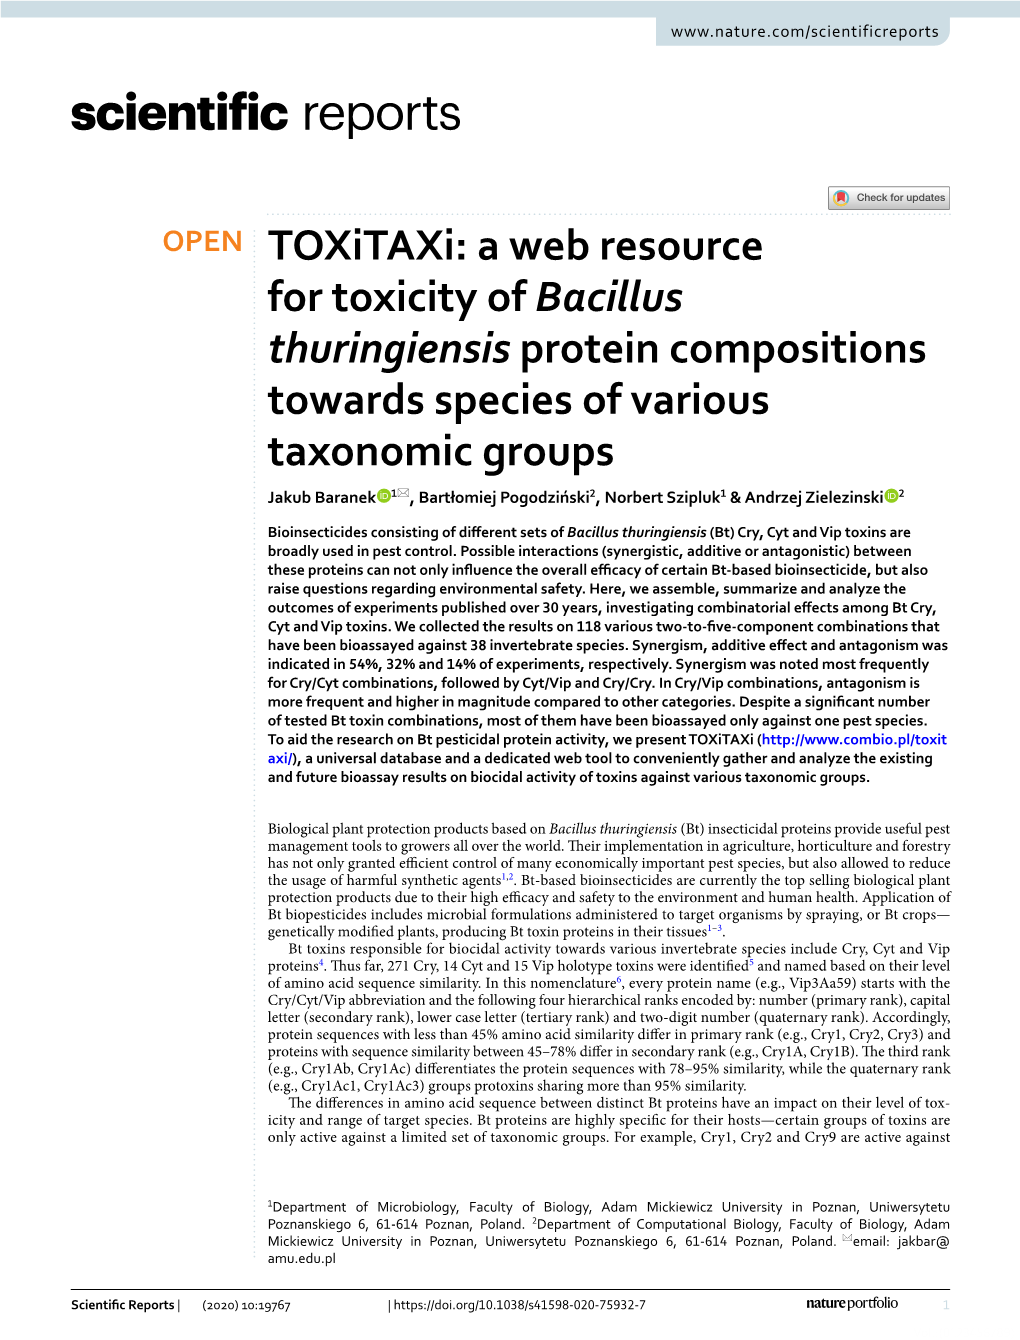 A Web Resource for Toxicity of Bacillus Thuringiensis Protein